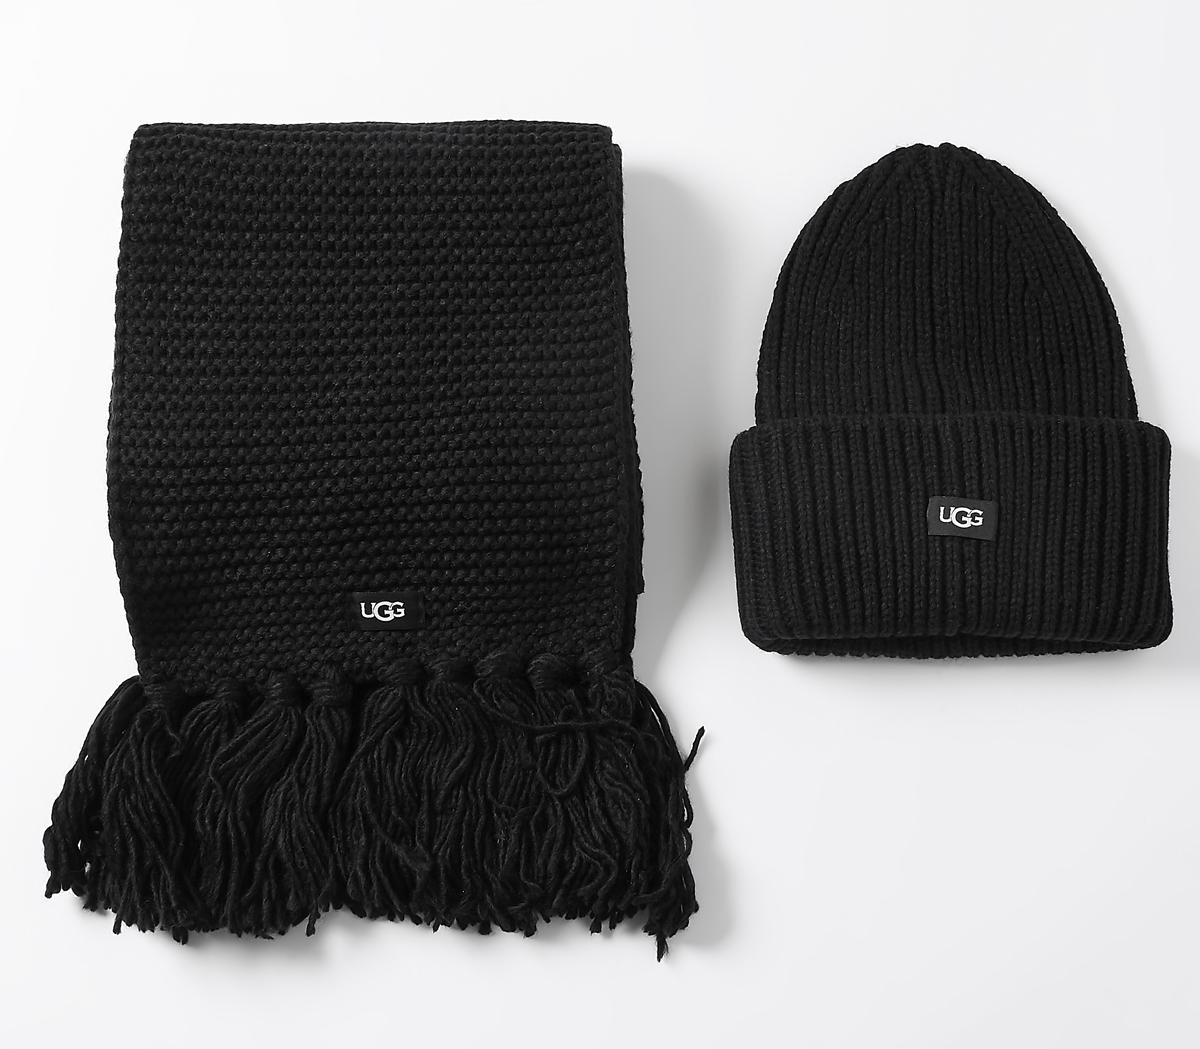 ugg winter hat and scarf